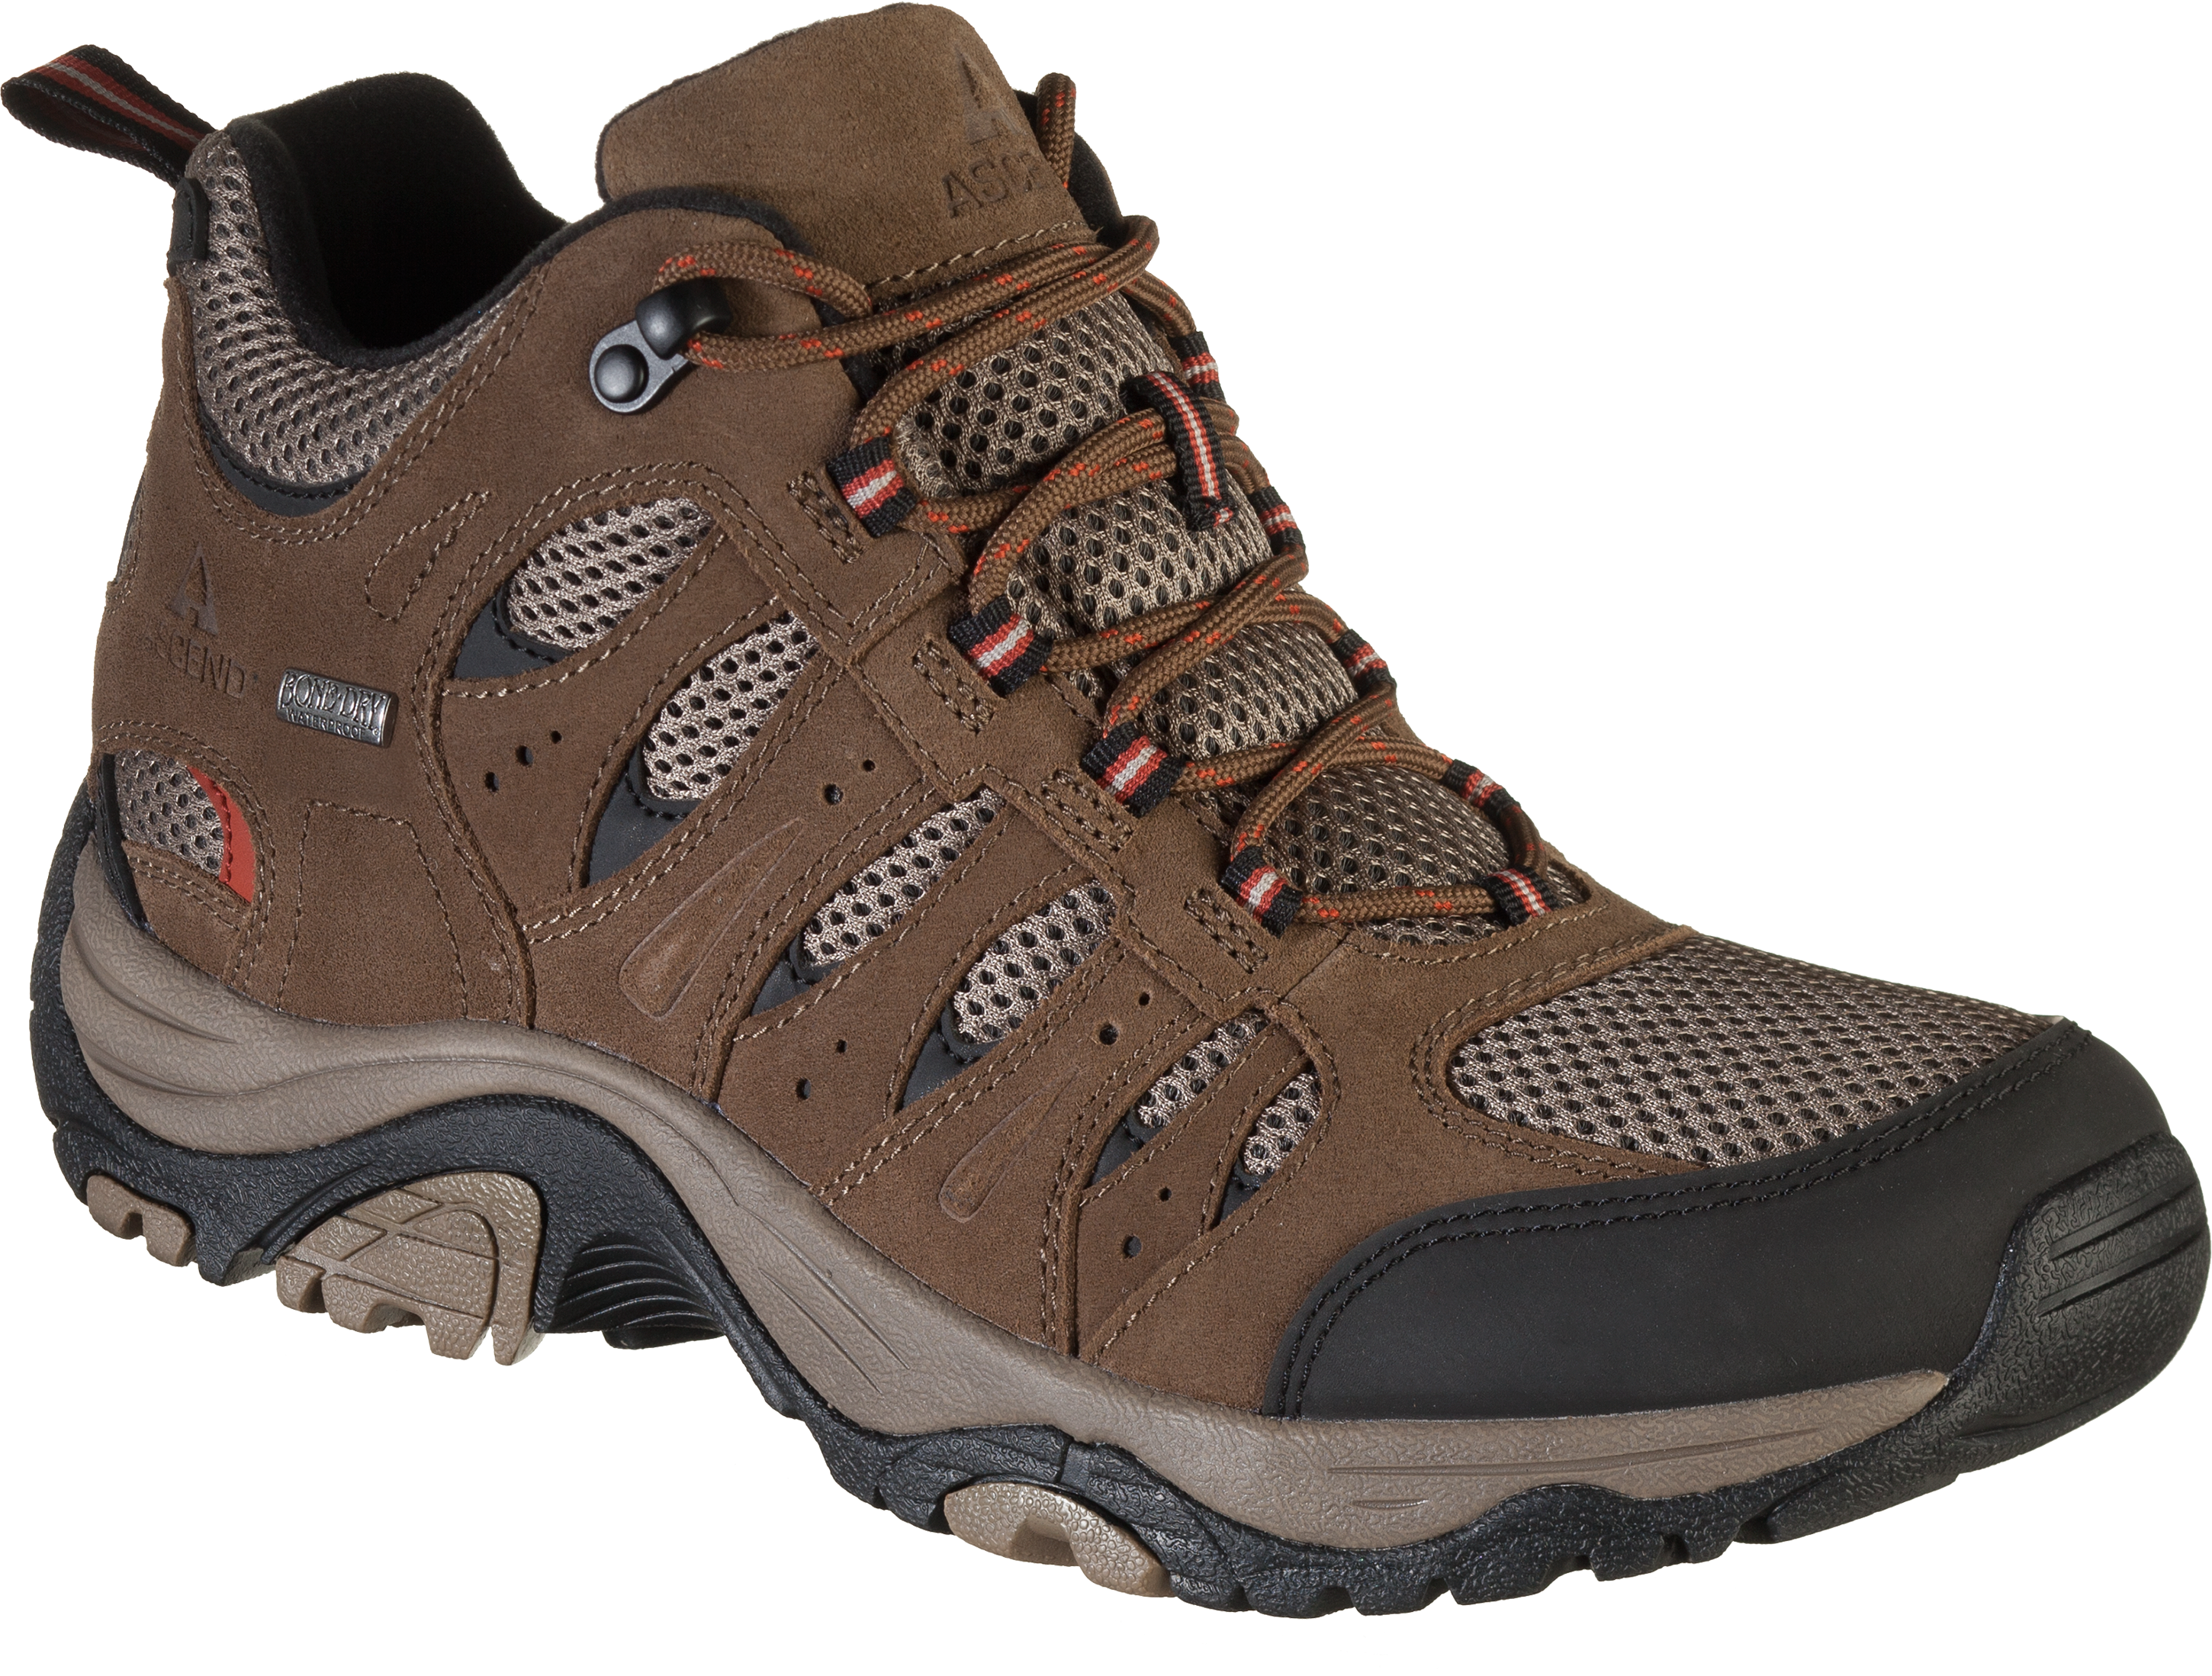 Ascend Lisco Mid Waterproof Hiking Boots for Men - Chocolate - 9.5M